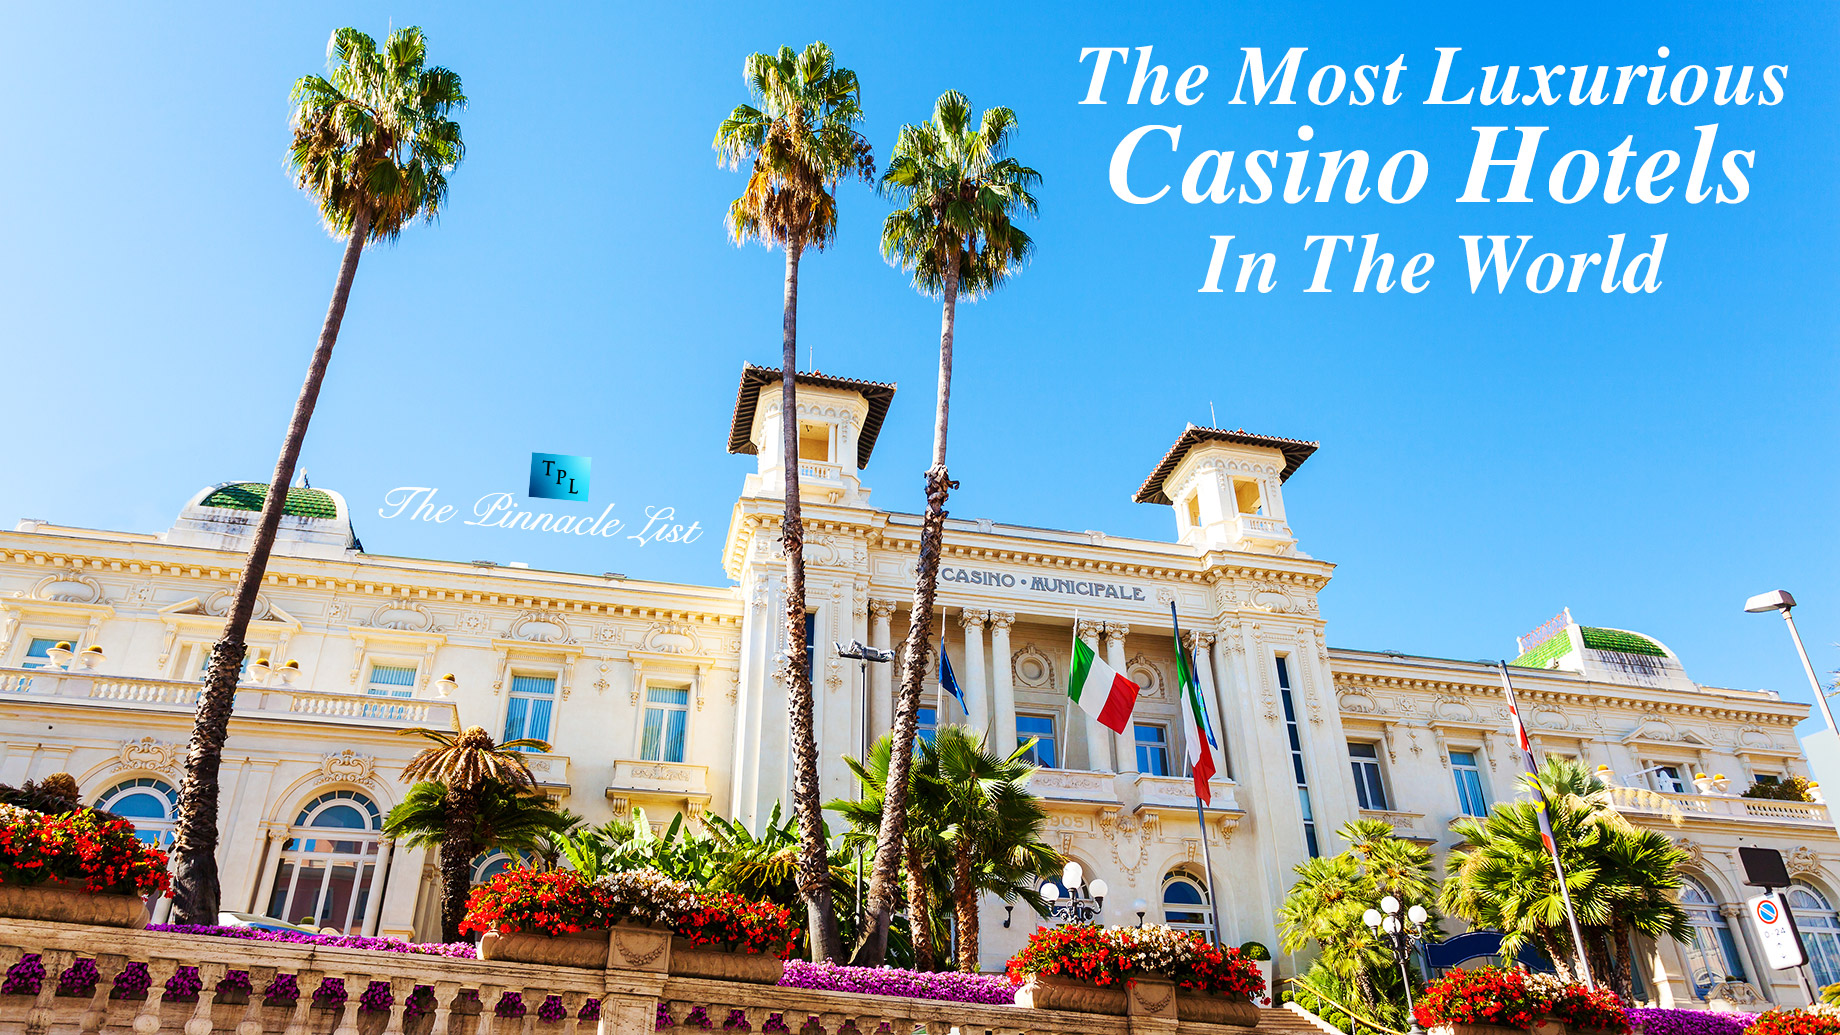 The Most Luxurious Casino Hotels In The World